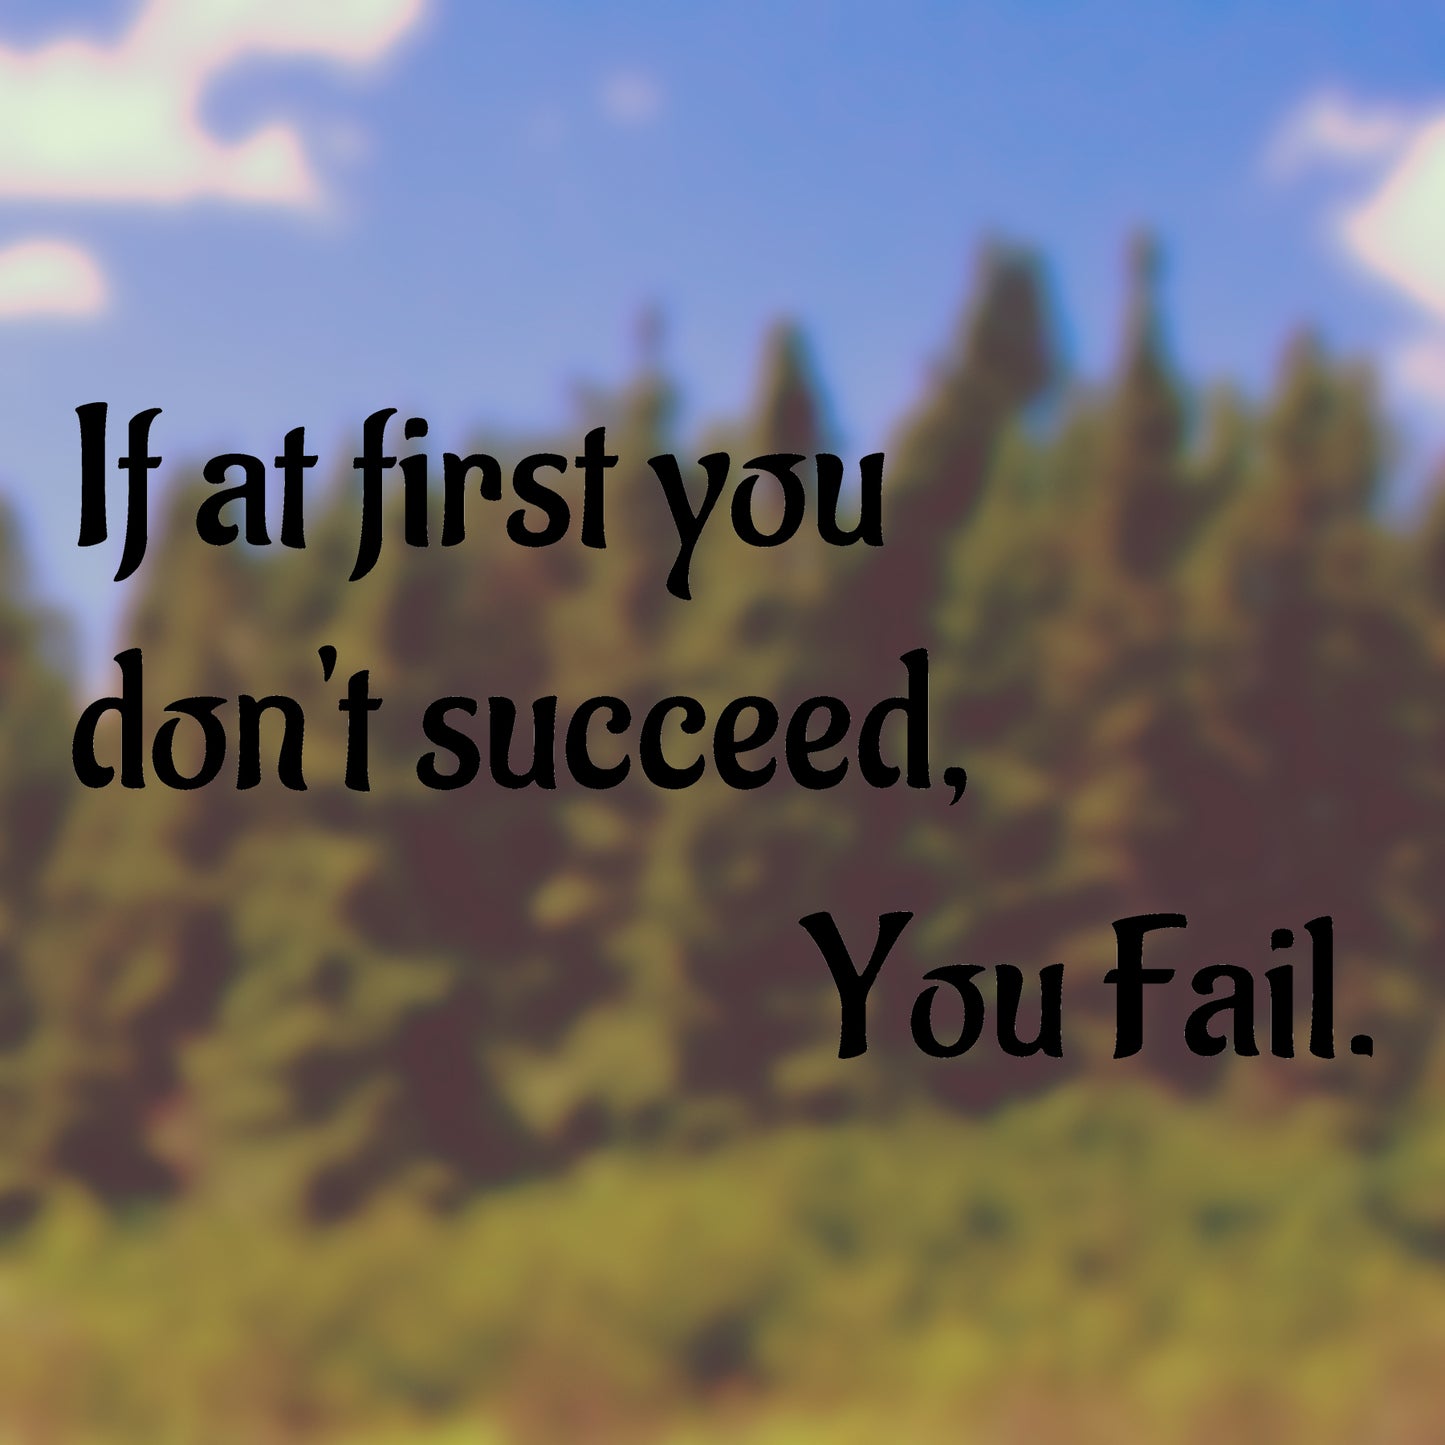 If at first you don't succeed, you fail | Bumper sticker - Adnil Creations